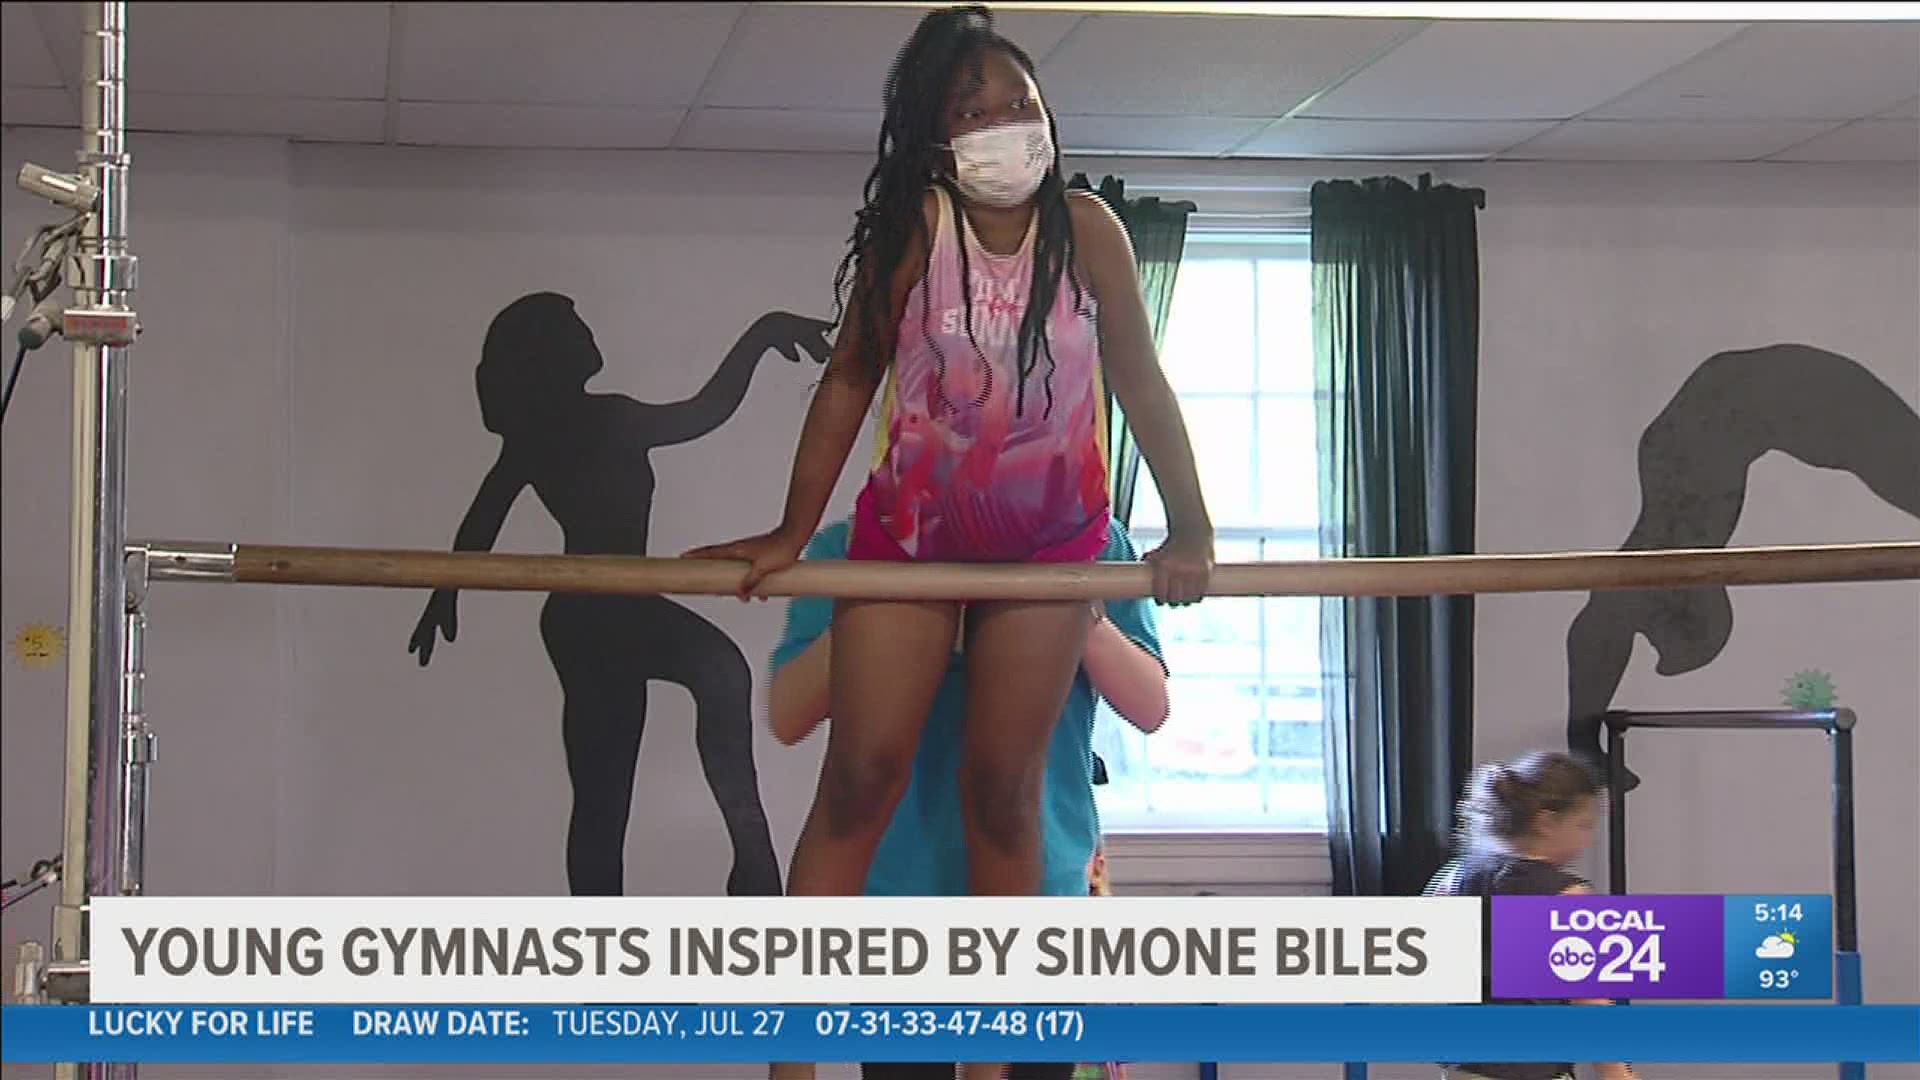 A gymnastics gym owner says Simone Biles decision to pull herself from finals speaks for mental health of athletes and is a lesson to her young gymnasts